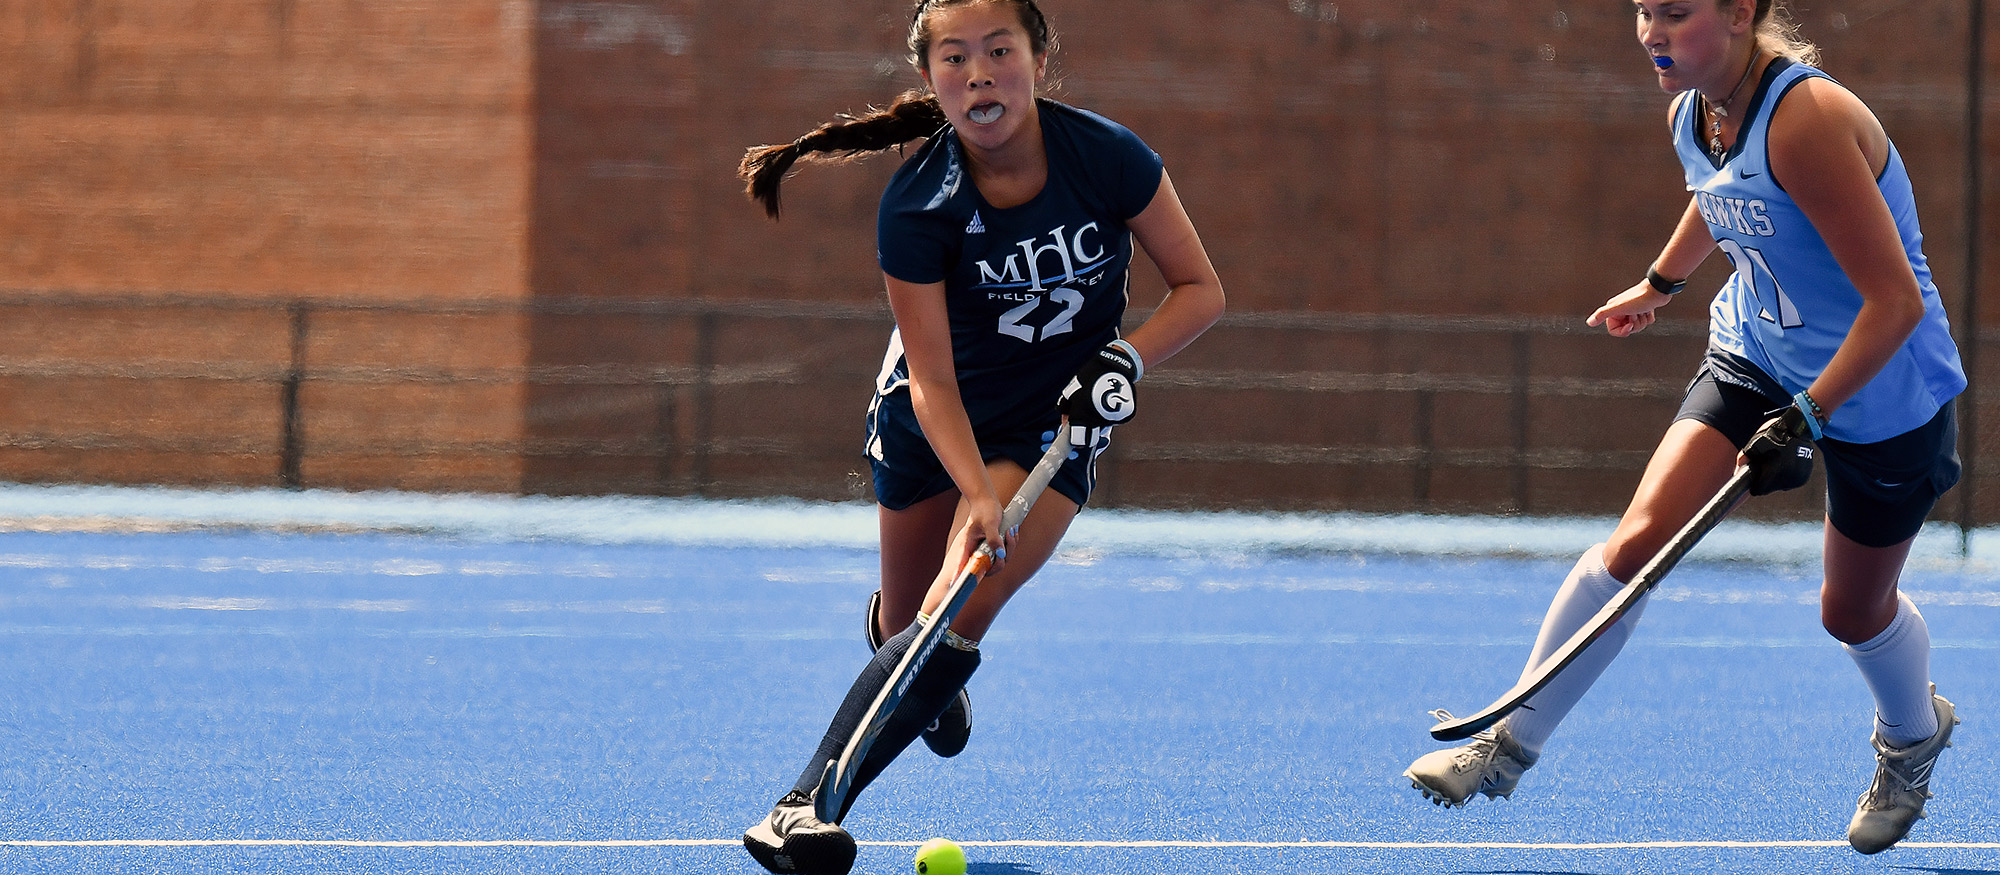 Anna Induni scored the first two goals in Mount Holyoke's 5-0 victory at Regis College on Sept. 21, 2022. (File photo by Bob Blanchard/RJB Sports)